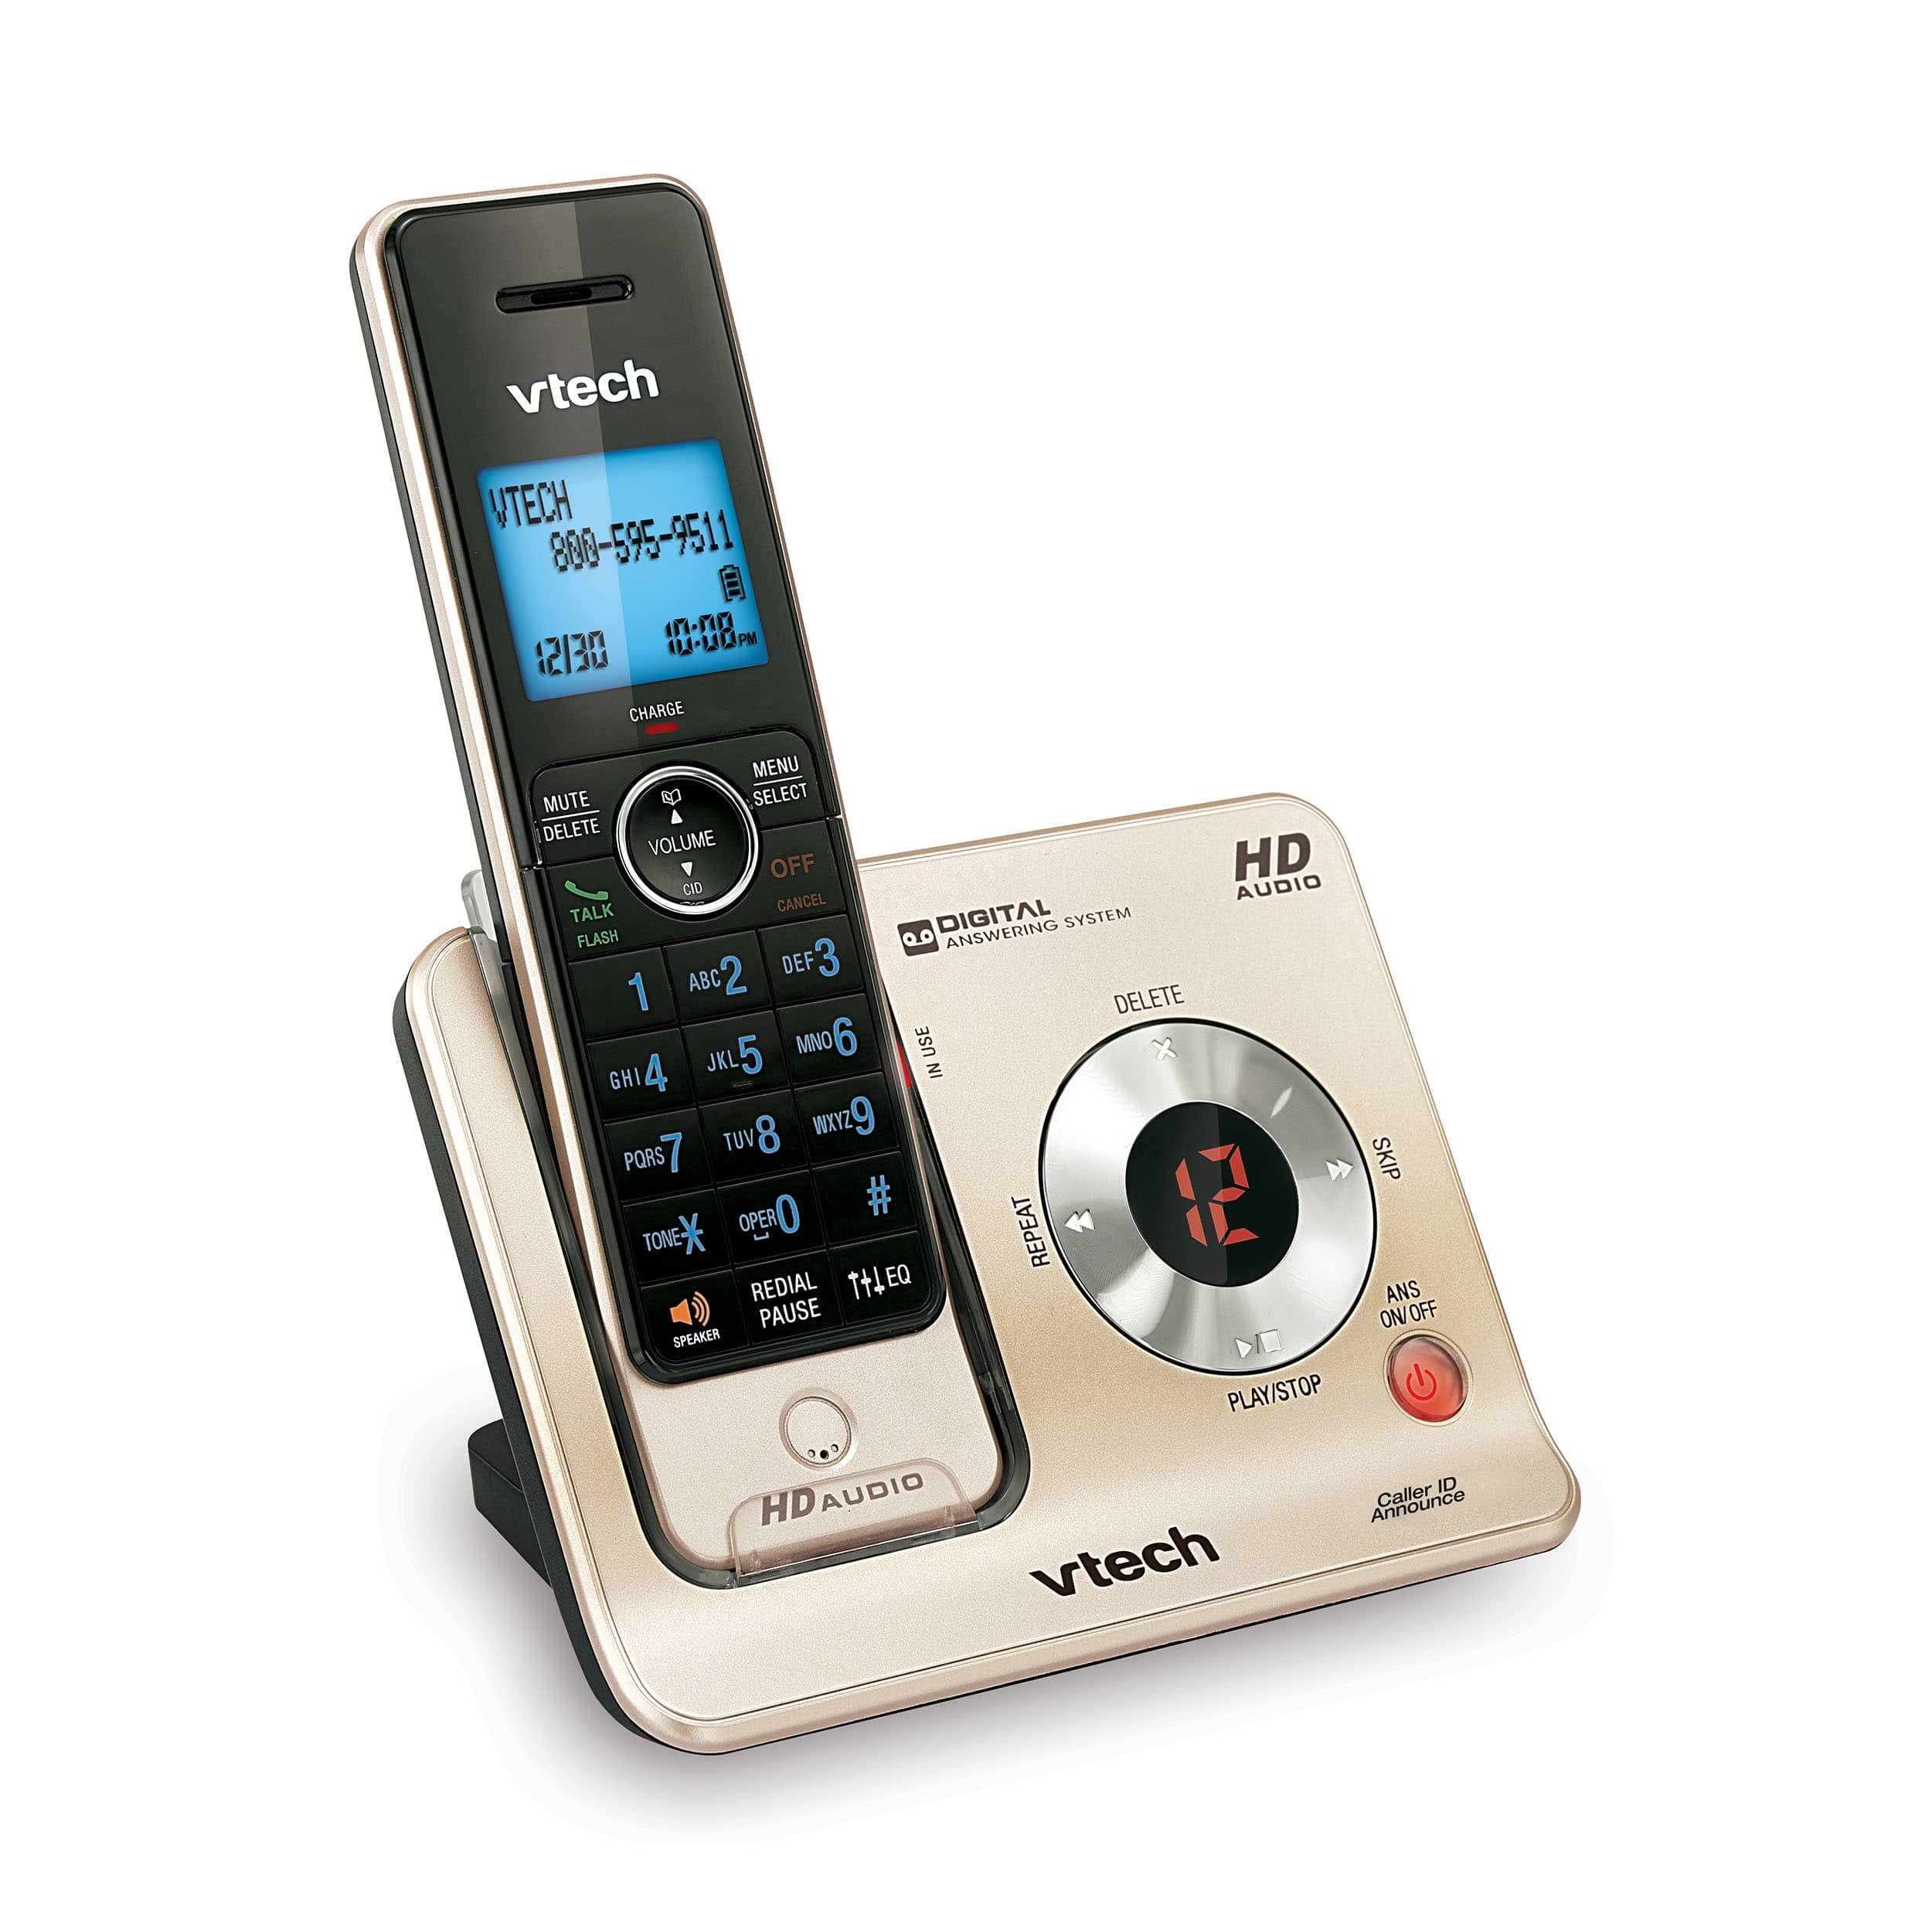 3 Handset Phone System with Caller ID/Call Waiting